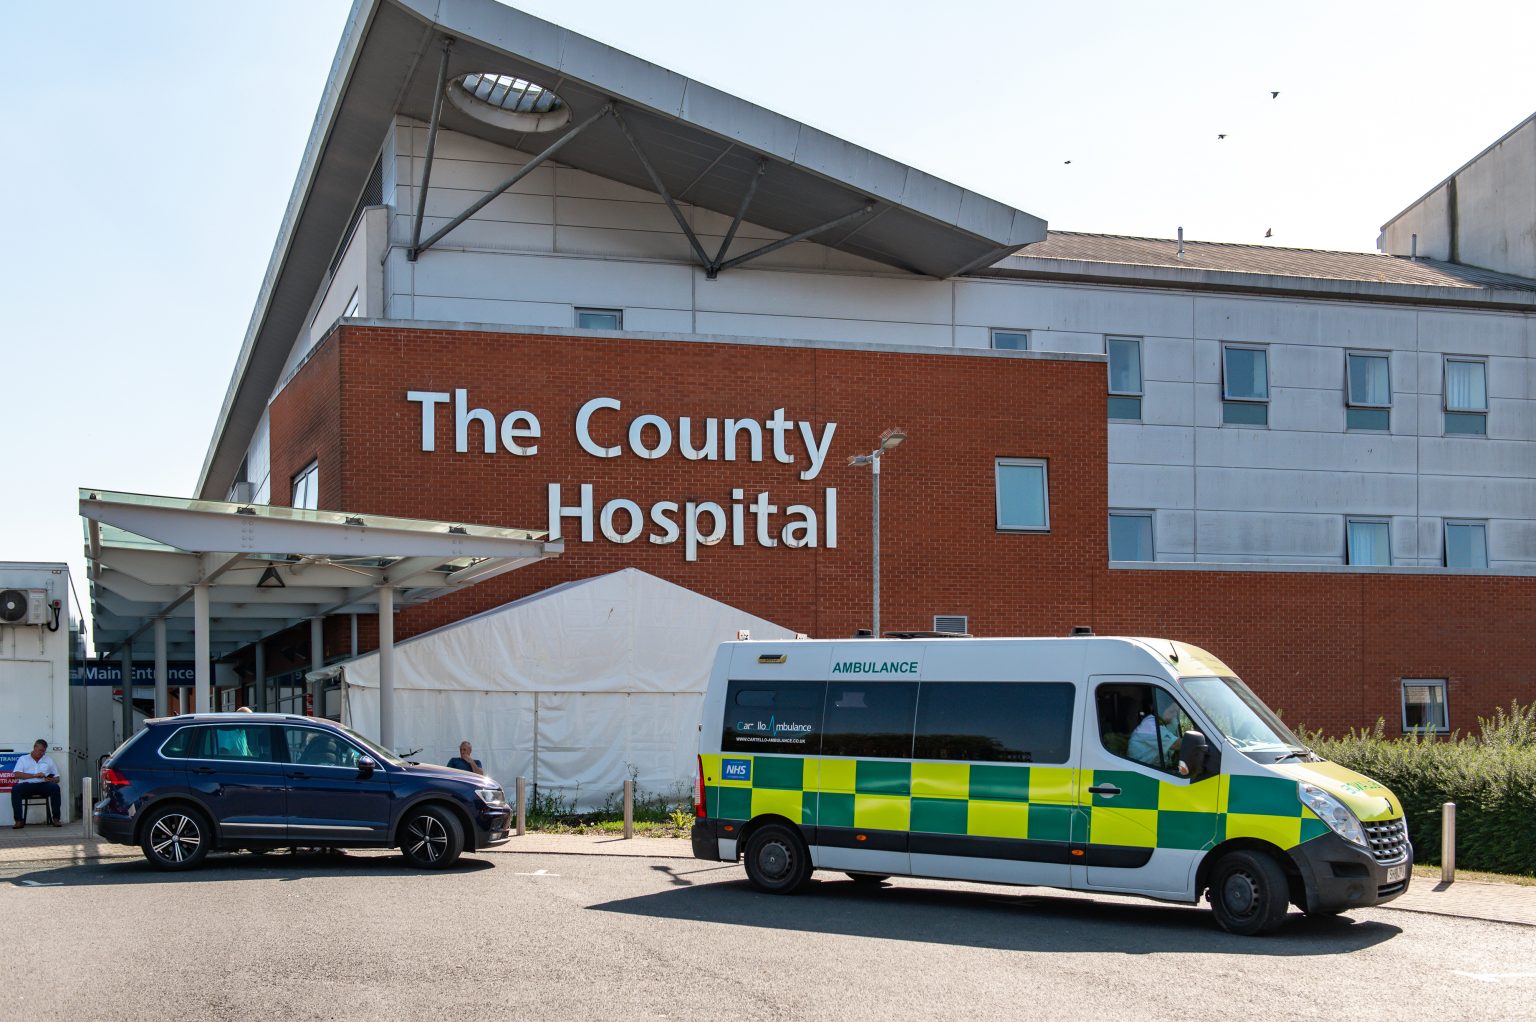 NEWS | Wye Valley NHS Trust has eased visiting restrictions to allow patients to see friends and family over festive period